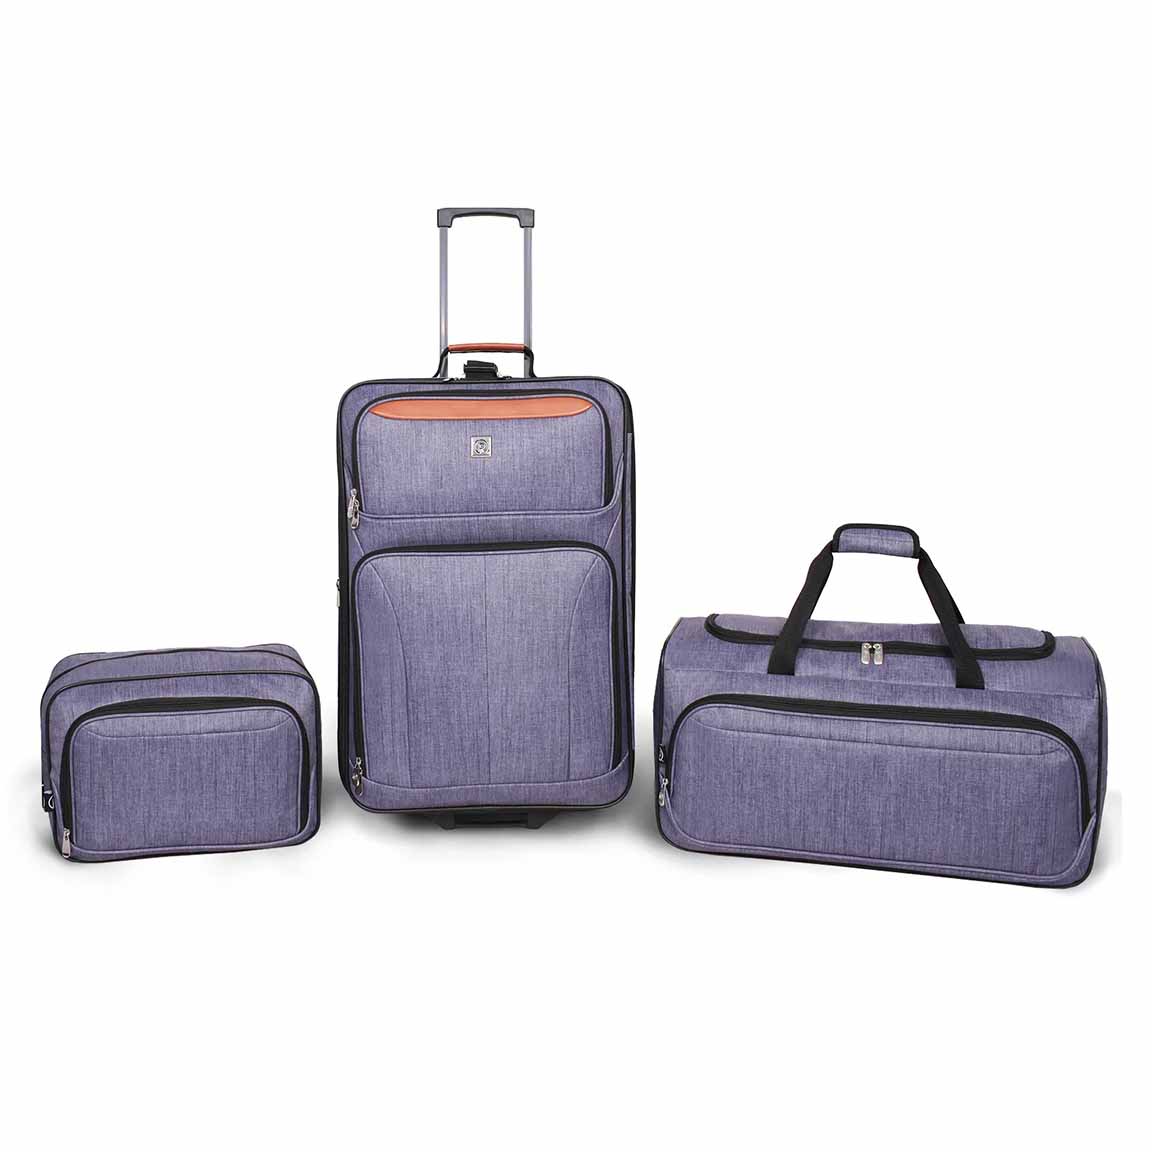 set of three luggage pieces: carry bag, duffel, and suitcase